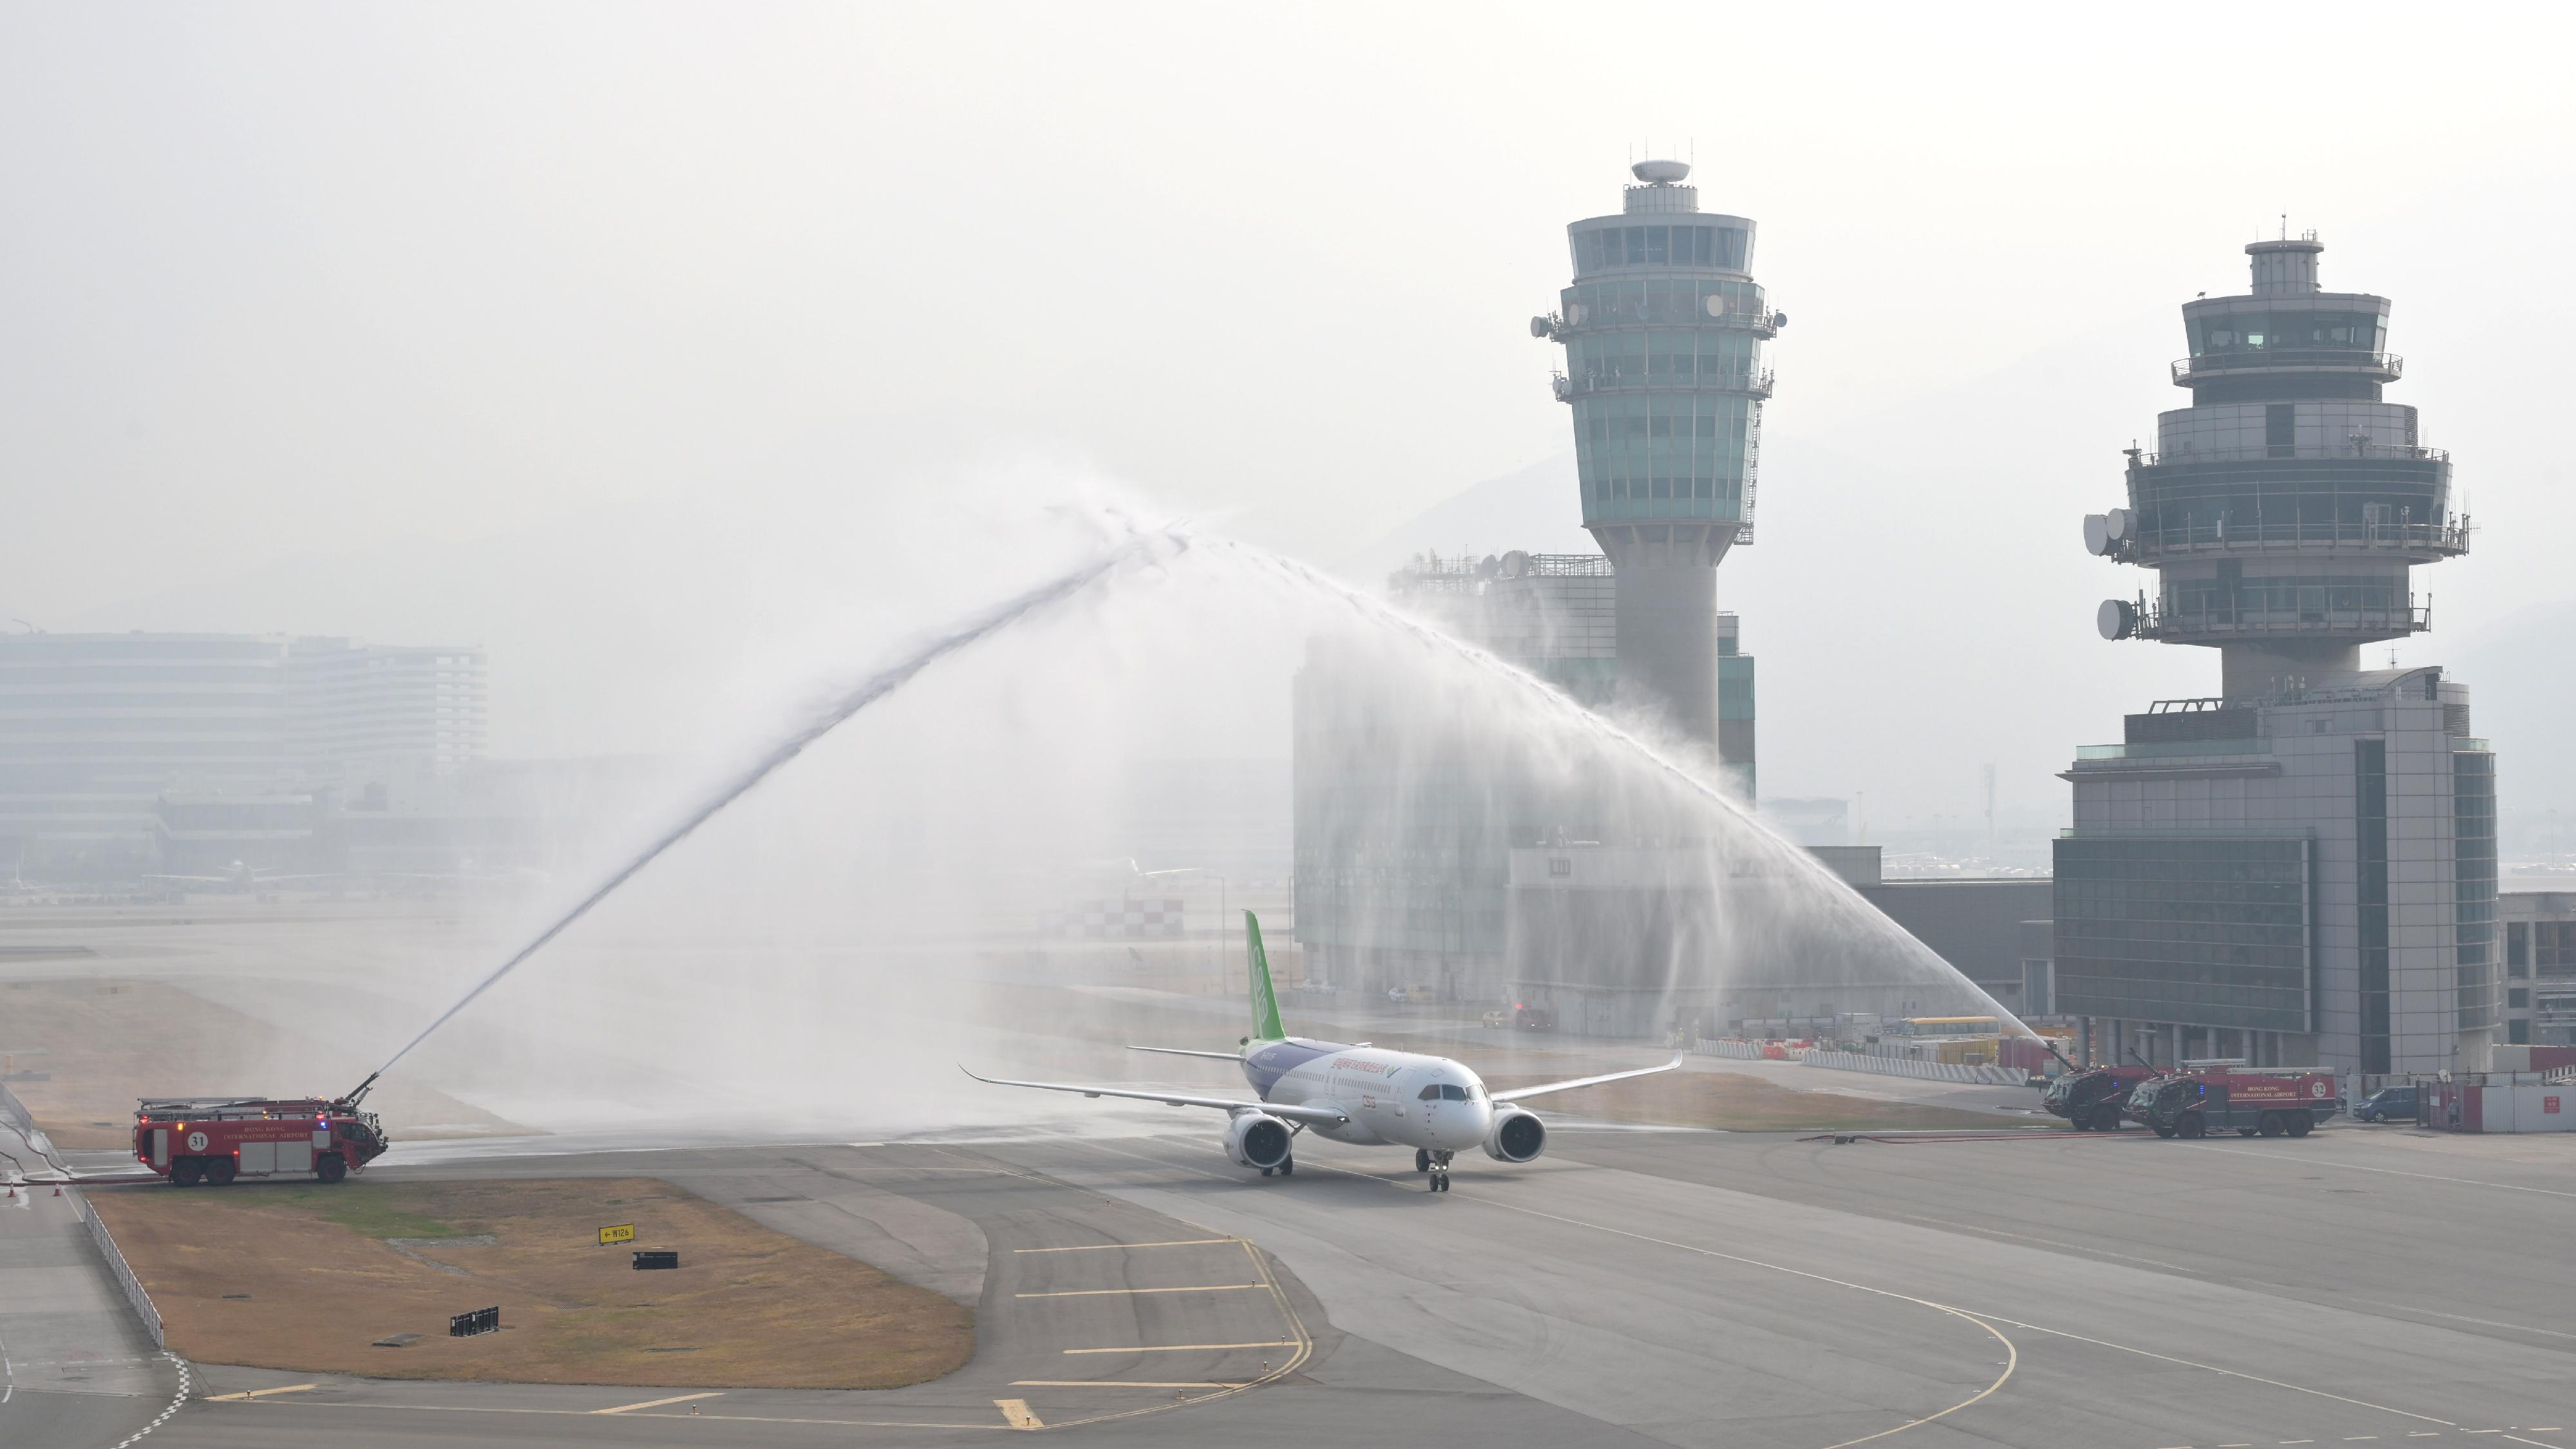 Home-developed aircraft C919 and ARJ21 launched inaugural flights to Hong Kong today (December 12). Photo shows the C919 aircraft being welcomed by a ceremonial water salute upon its arrival at Hong Kong International Airport.	


